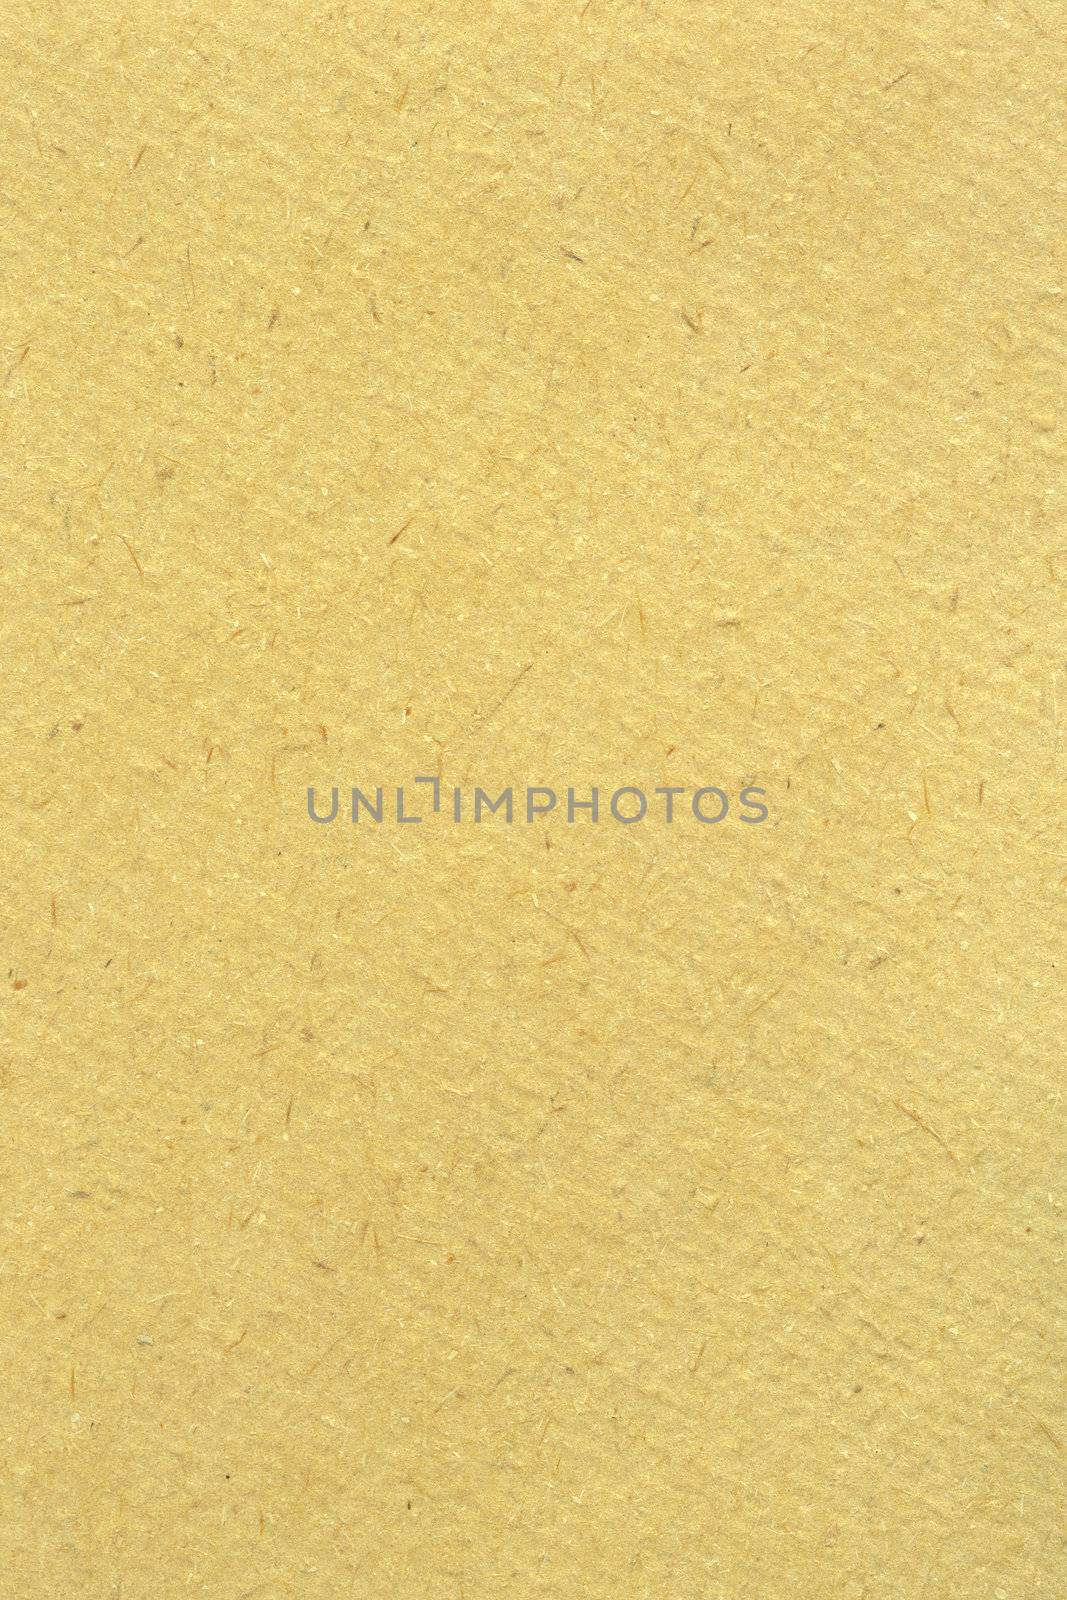 XXL background image of old textured handmade paper.
